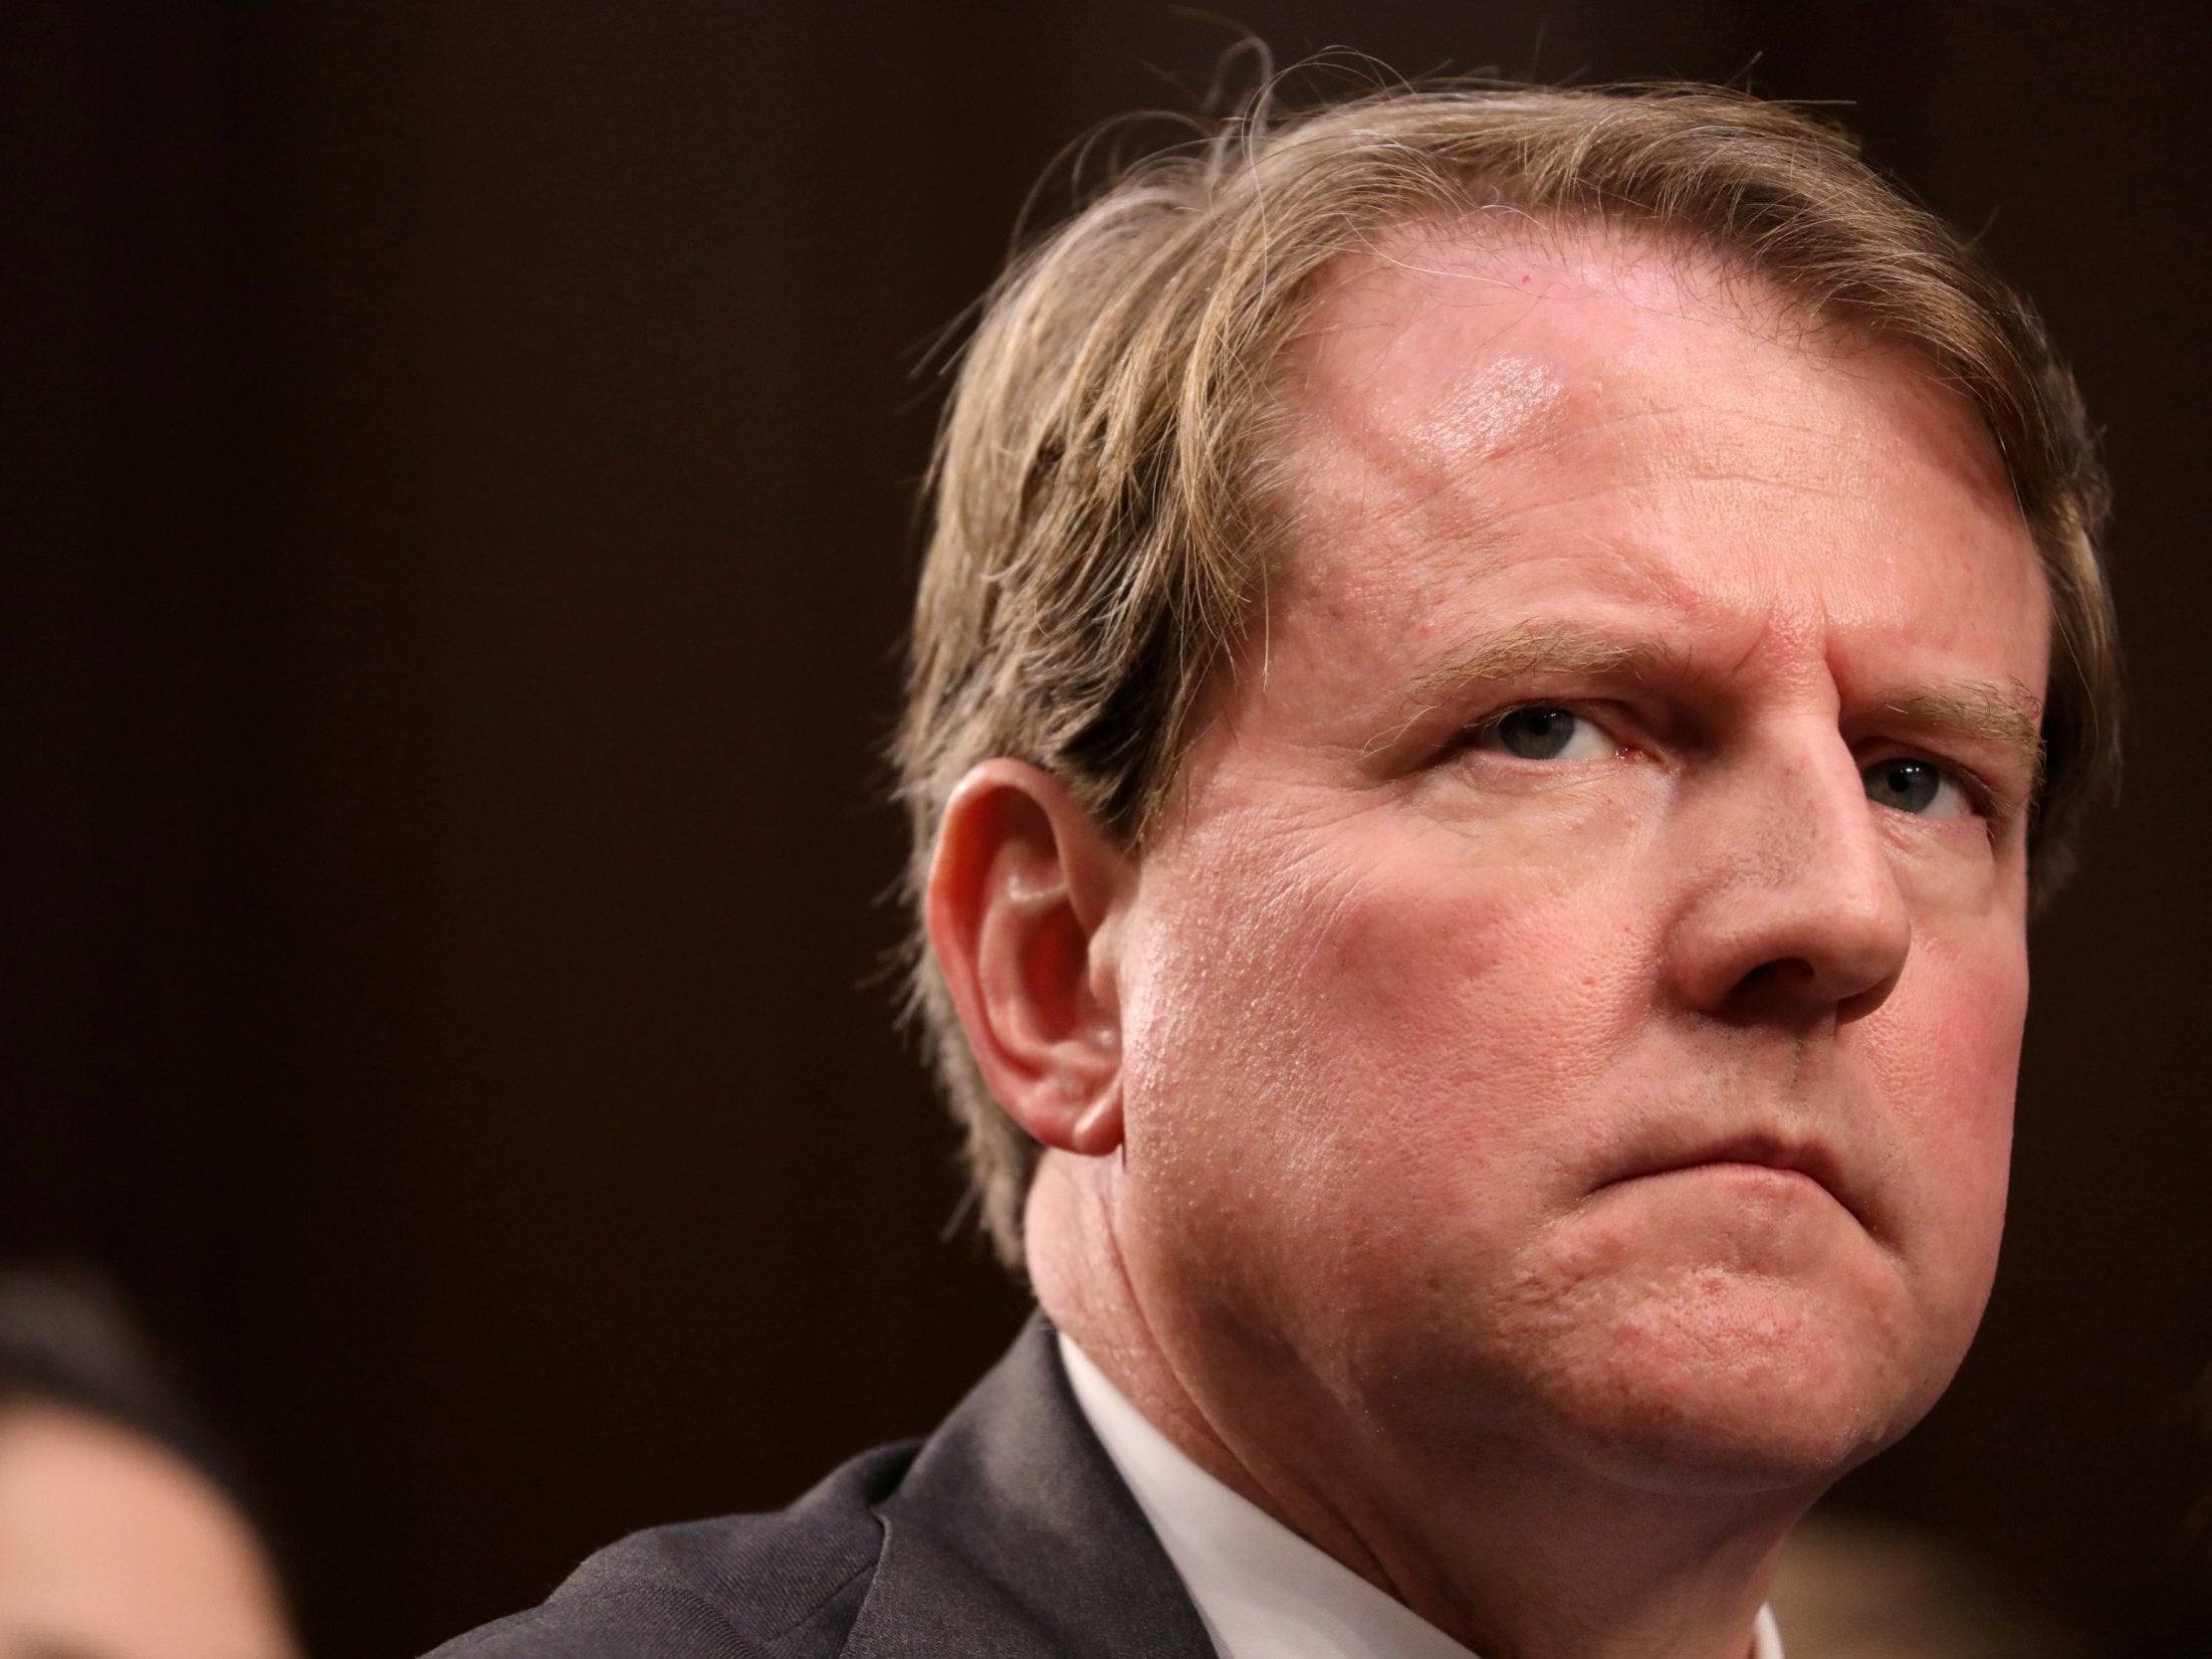 White House asked Don McGahn to say publicly that Trump did not obstruct justice, report says